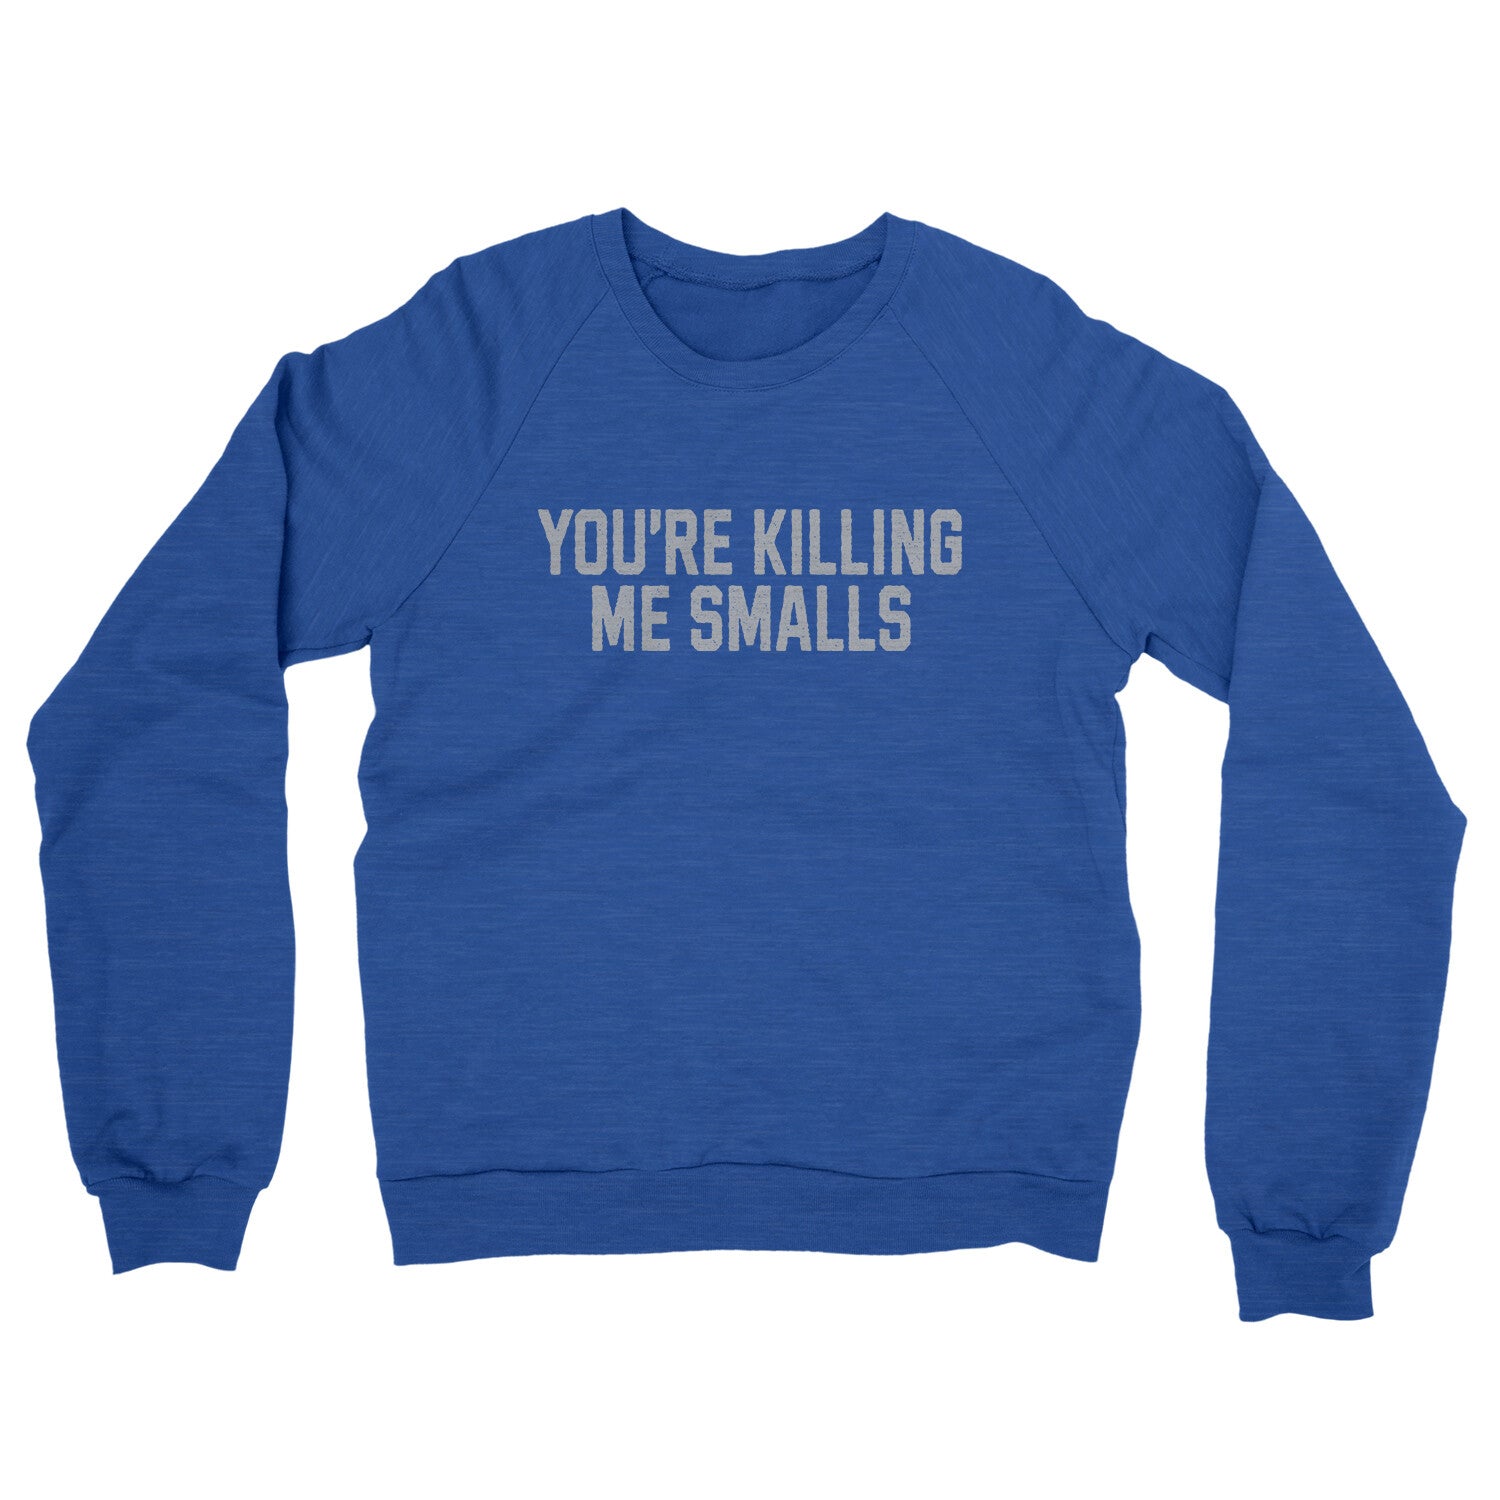 You're Killing me Smalls in Heather Royal Color